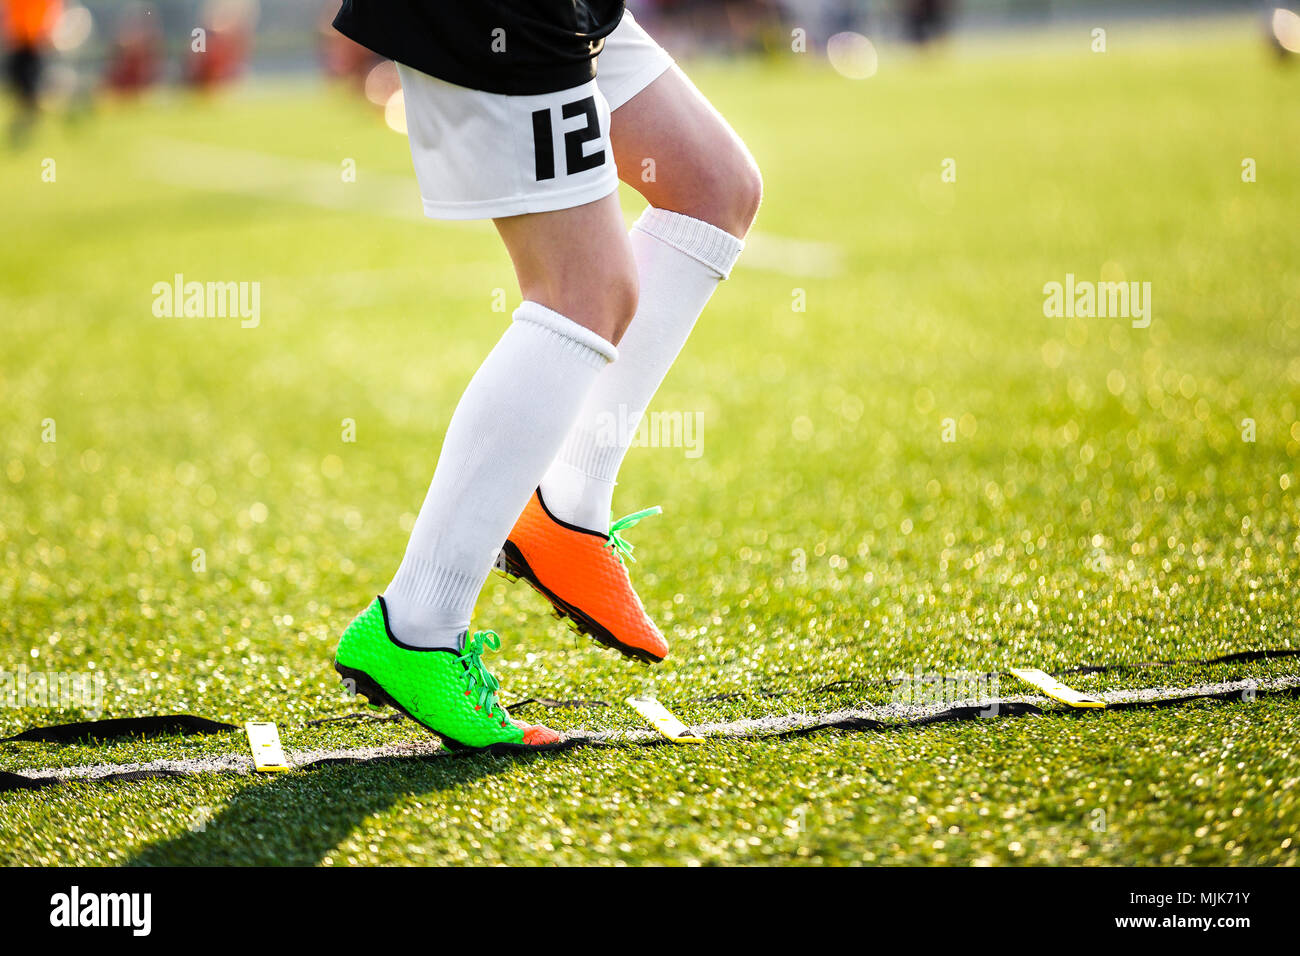 Boy Football Player on a Training with Ladder. Young Soccer Player at Training Session. Soccer Speed Ladder Drills. Training Drills To Improve Speed Stock Photo